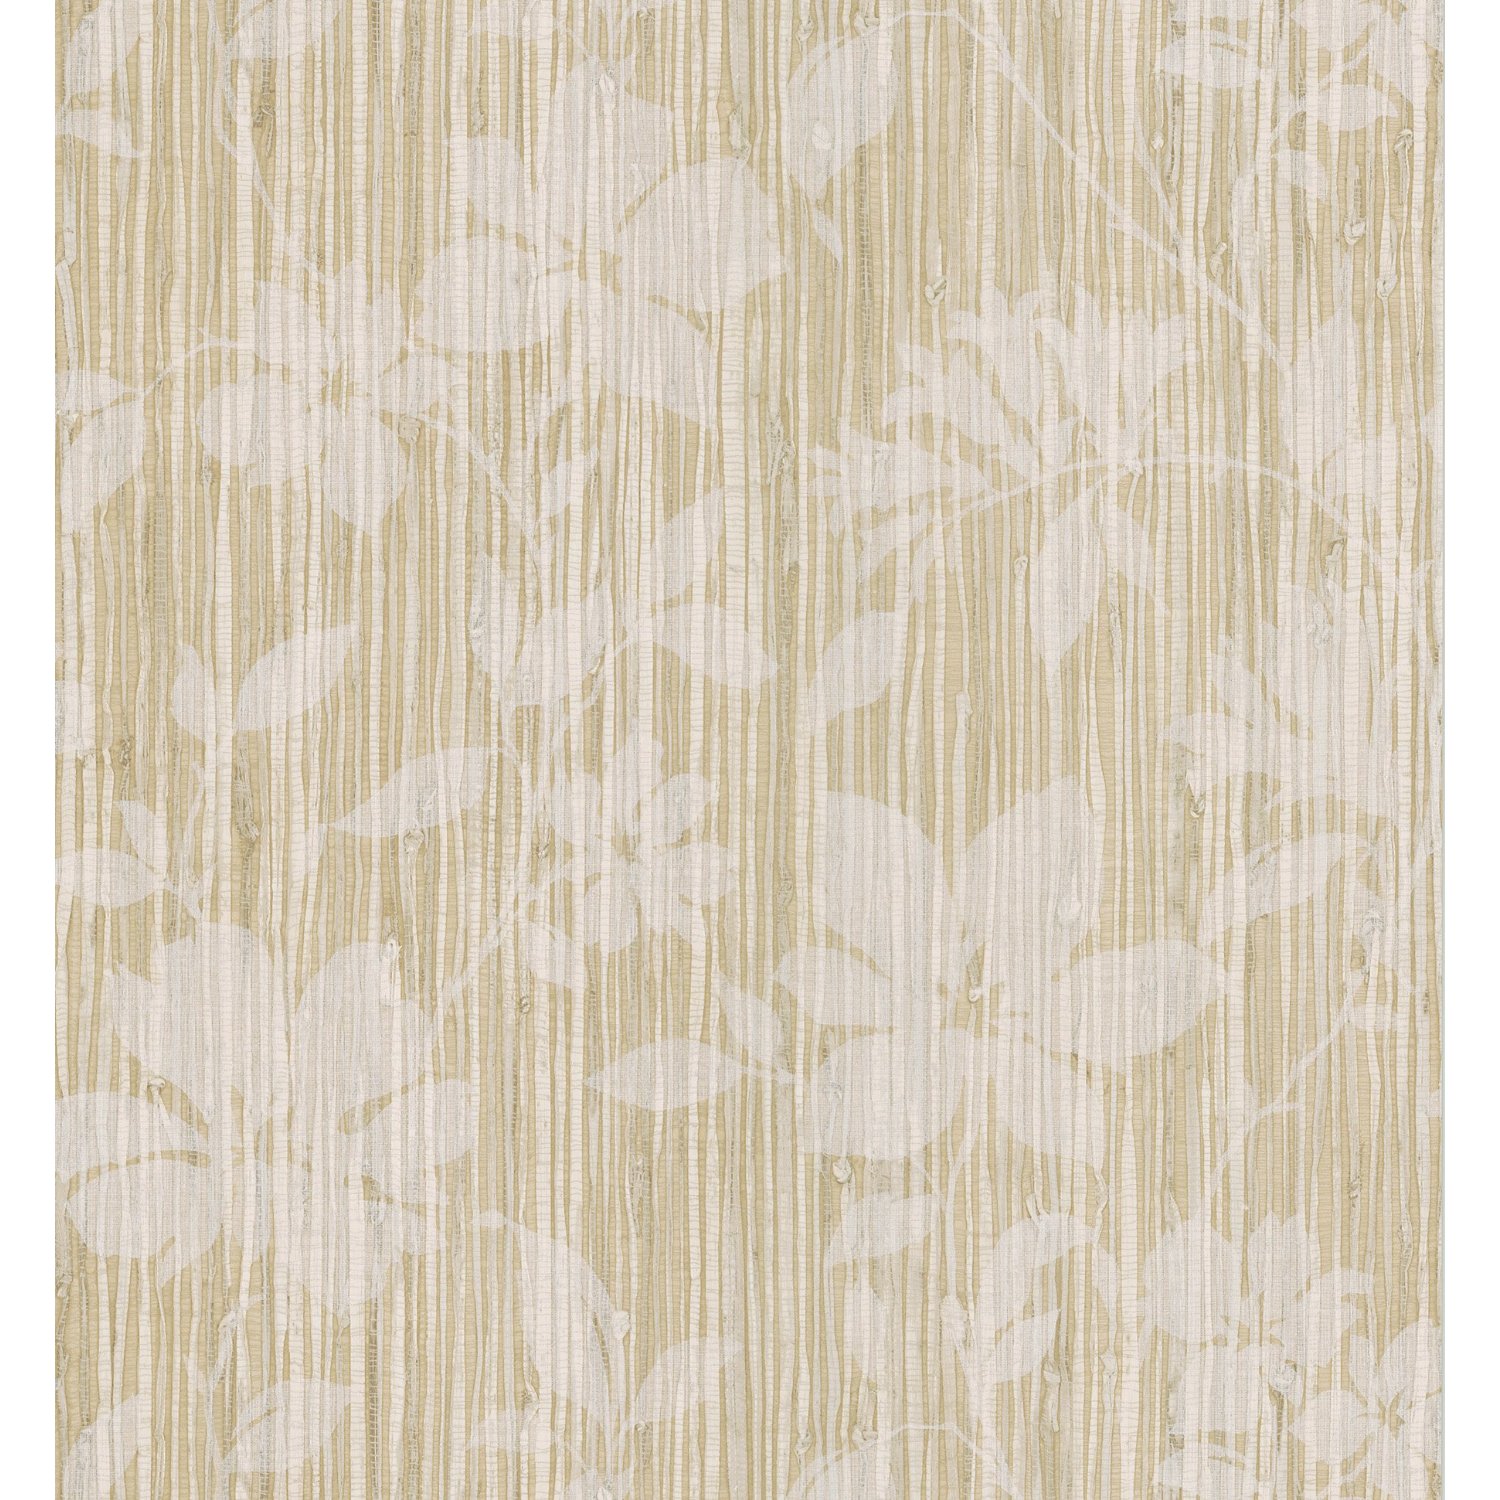 Grasscloth Wallpaper Never Goes Out of Style 1500x1500